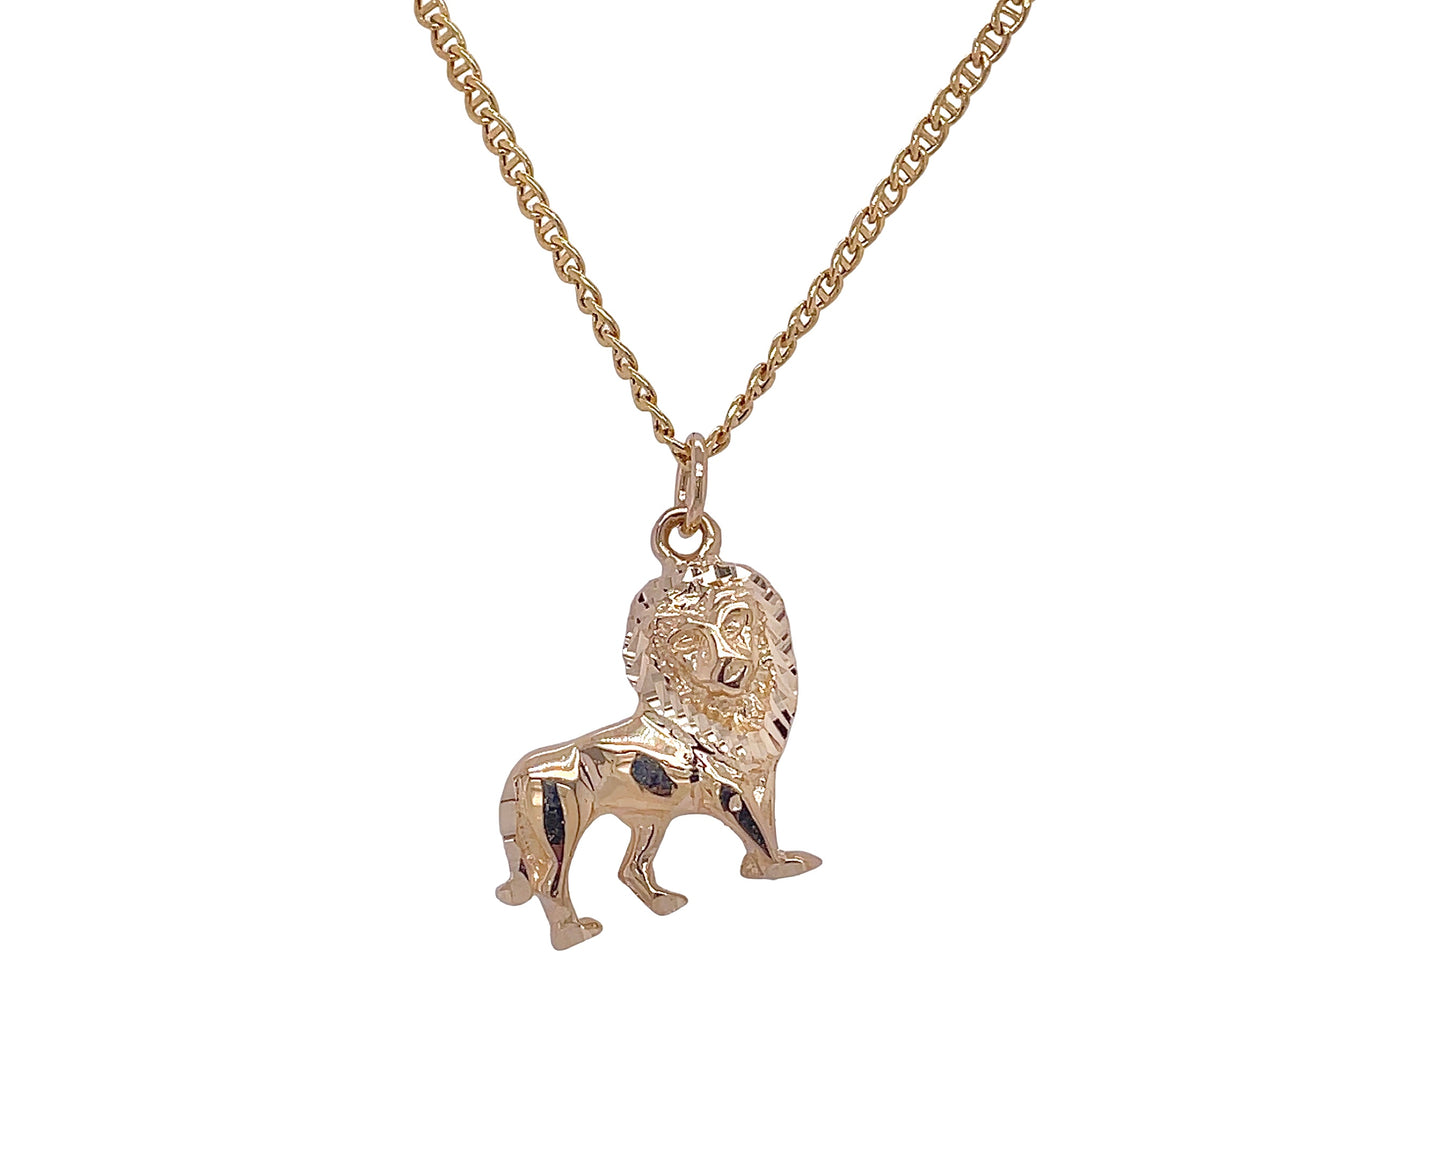 walking lion necklace the jewelry perfect gift 